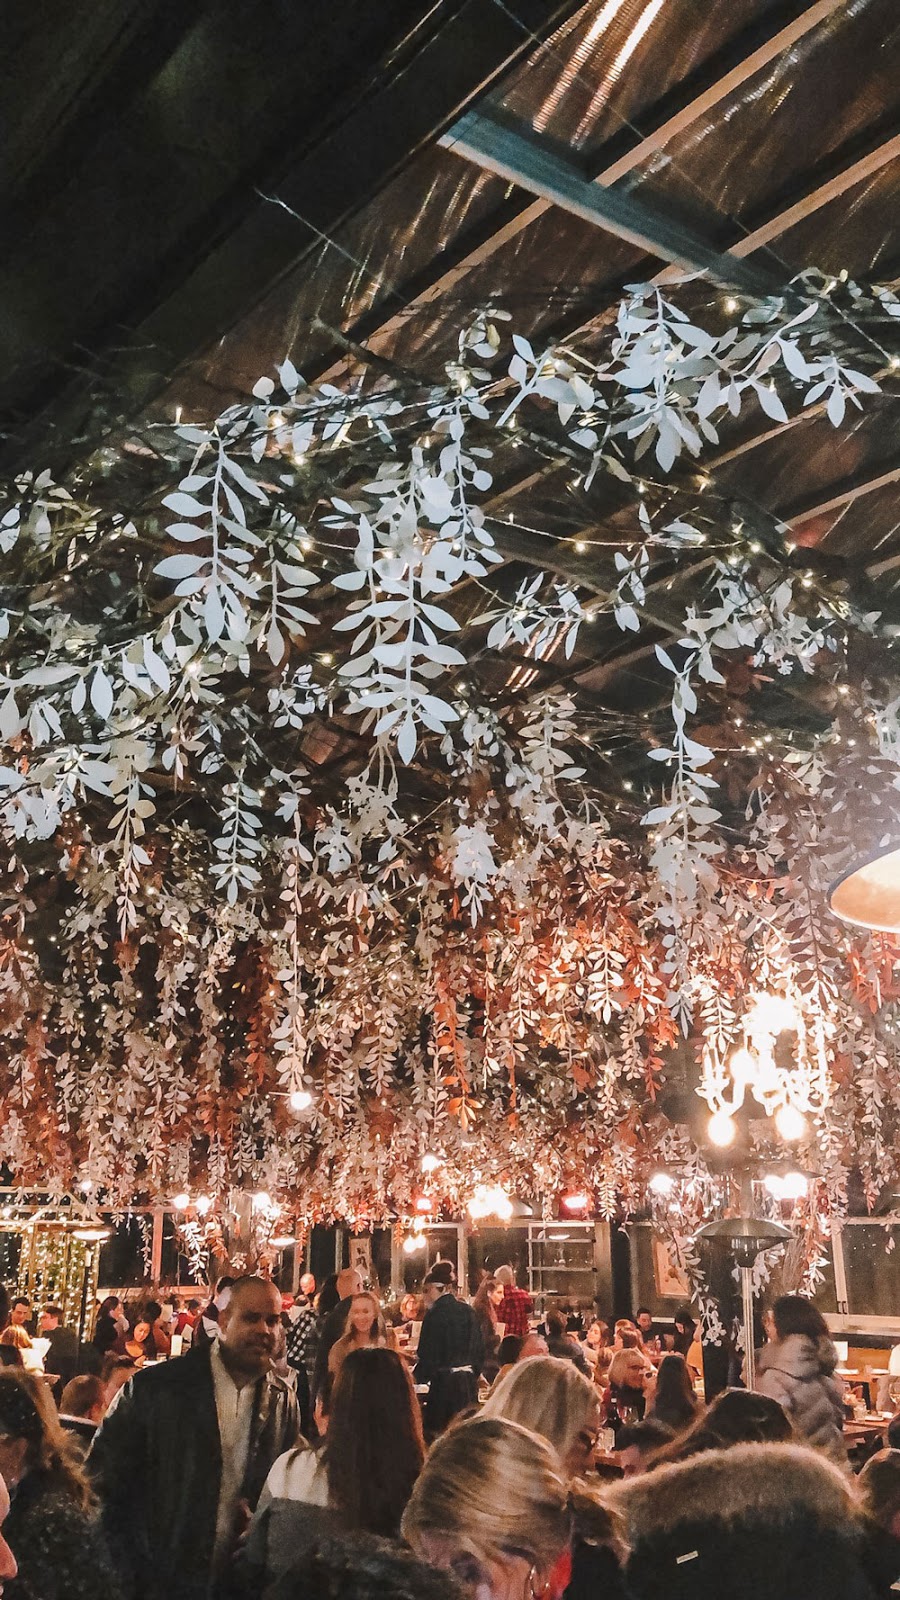 Christmas decorations at NYC Eataly's rooftop bar, Serra by Birreria 